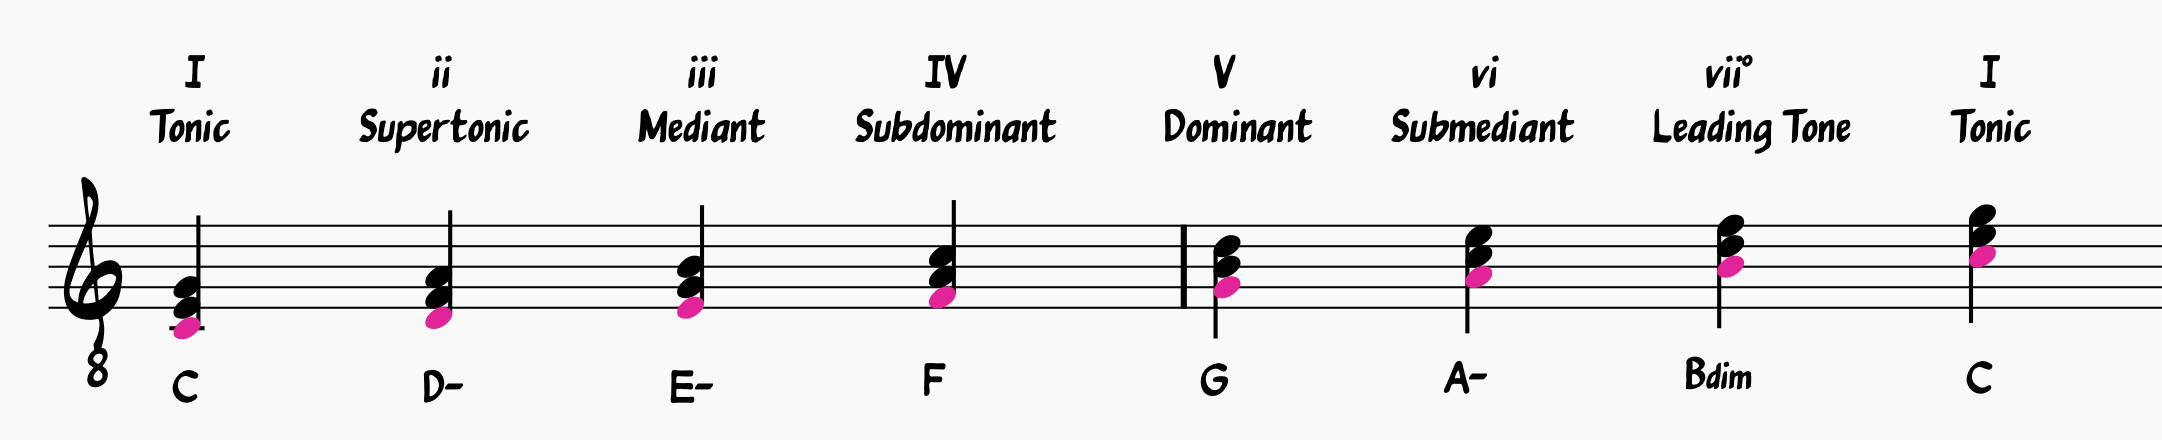 Major Scale Harmonized in Triads with the bass note (root note) colored